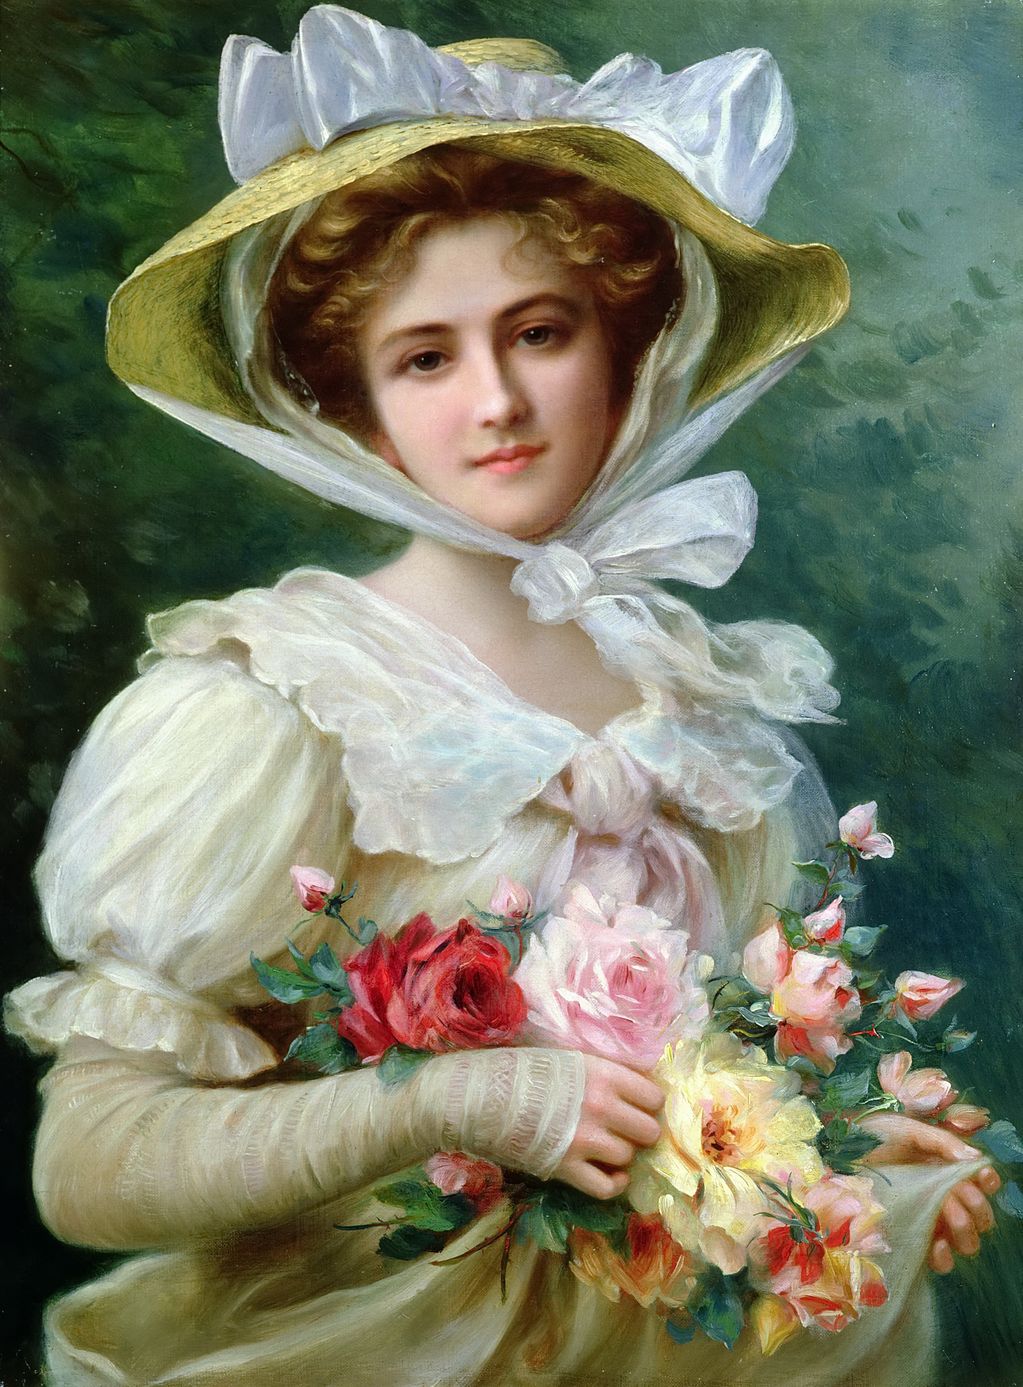 Elegant Lady with a Bouquet of Roses by Emile Vernon, Date unknown